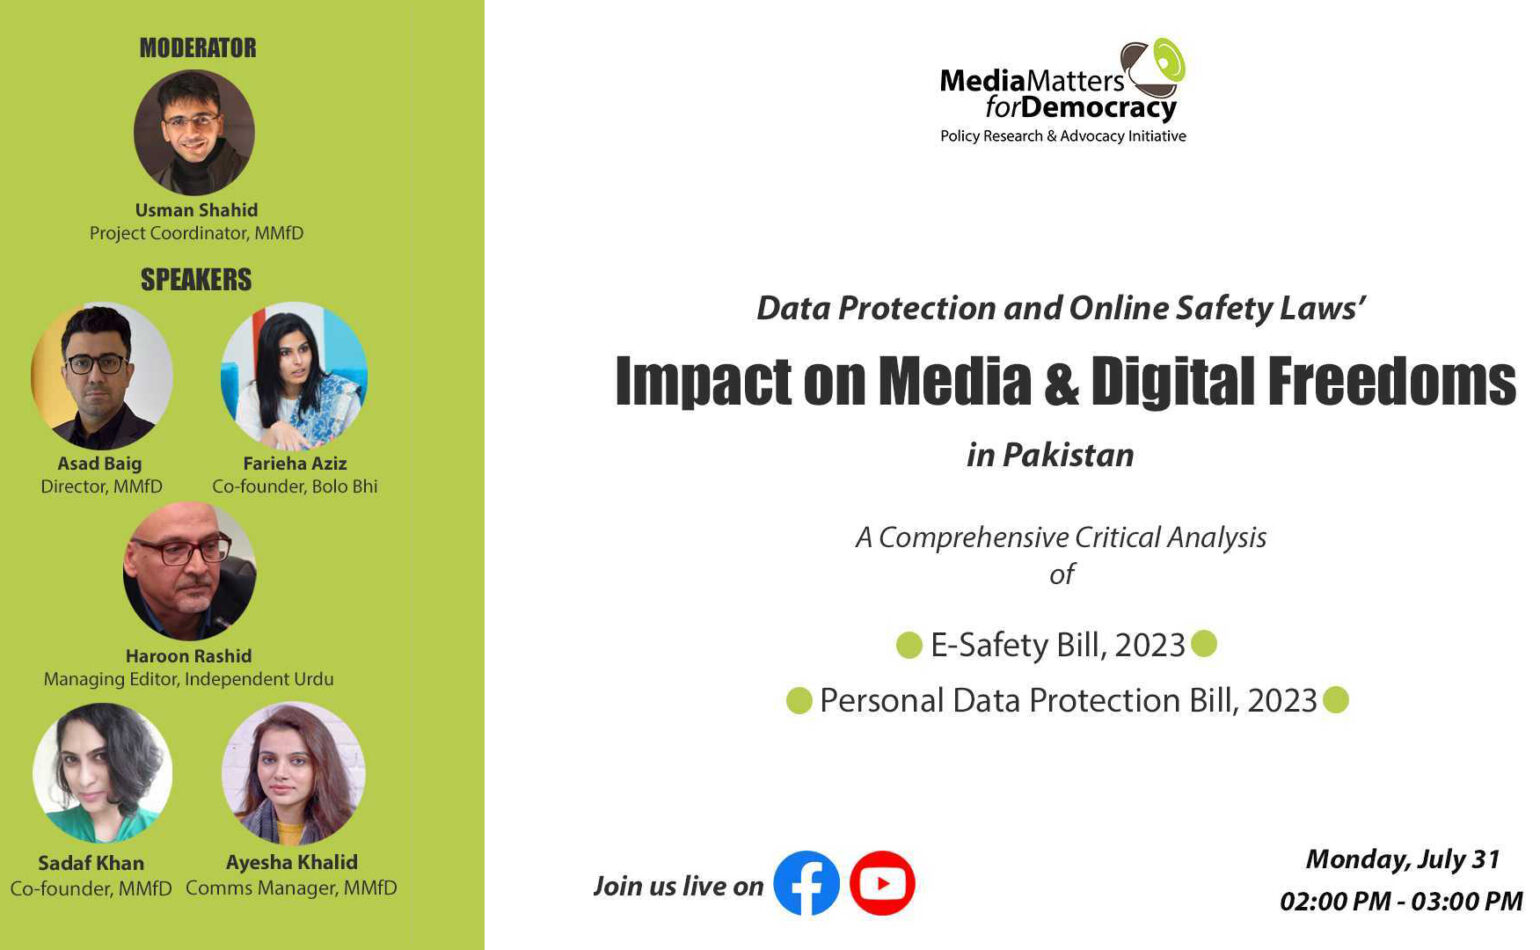 EXCLUSIVE: A critical analysis of E-Safety Bill, Personal Data Protection Bill 2023